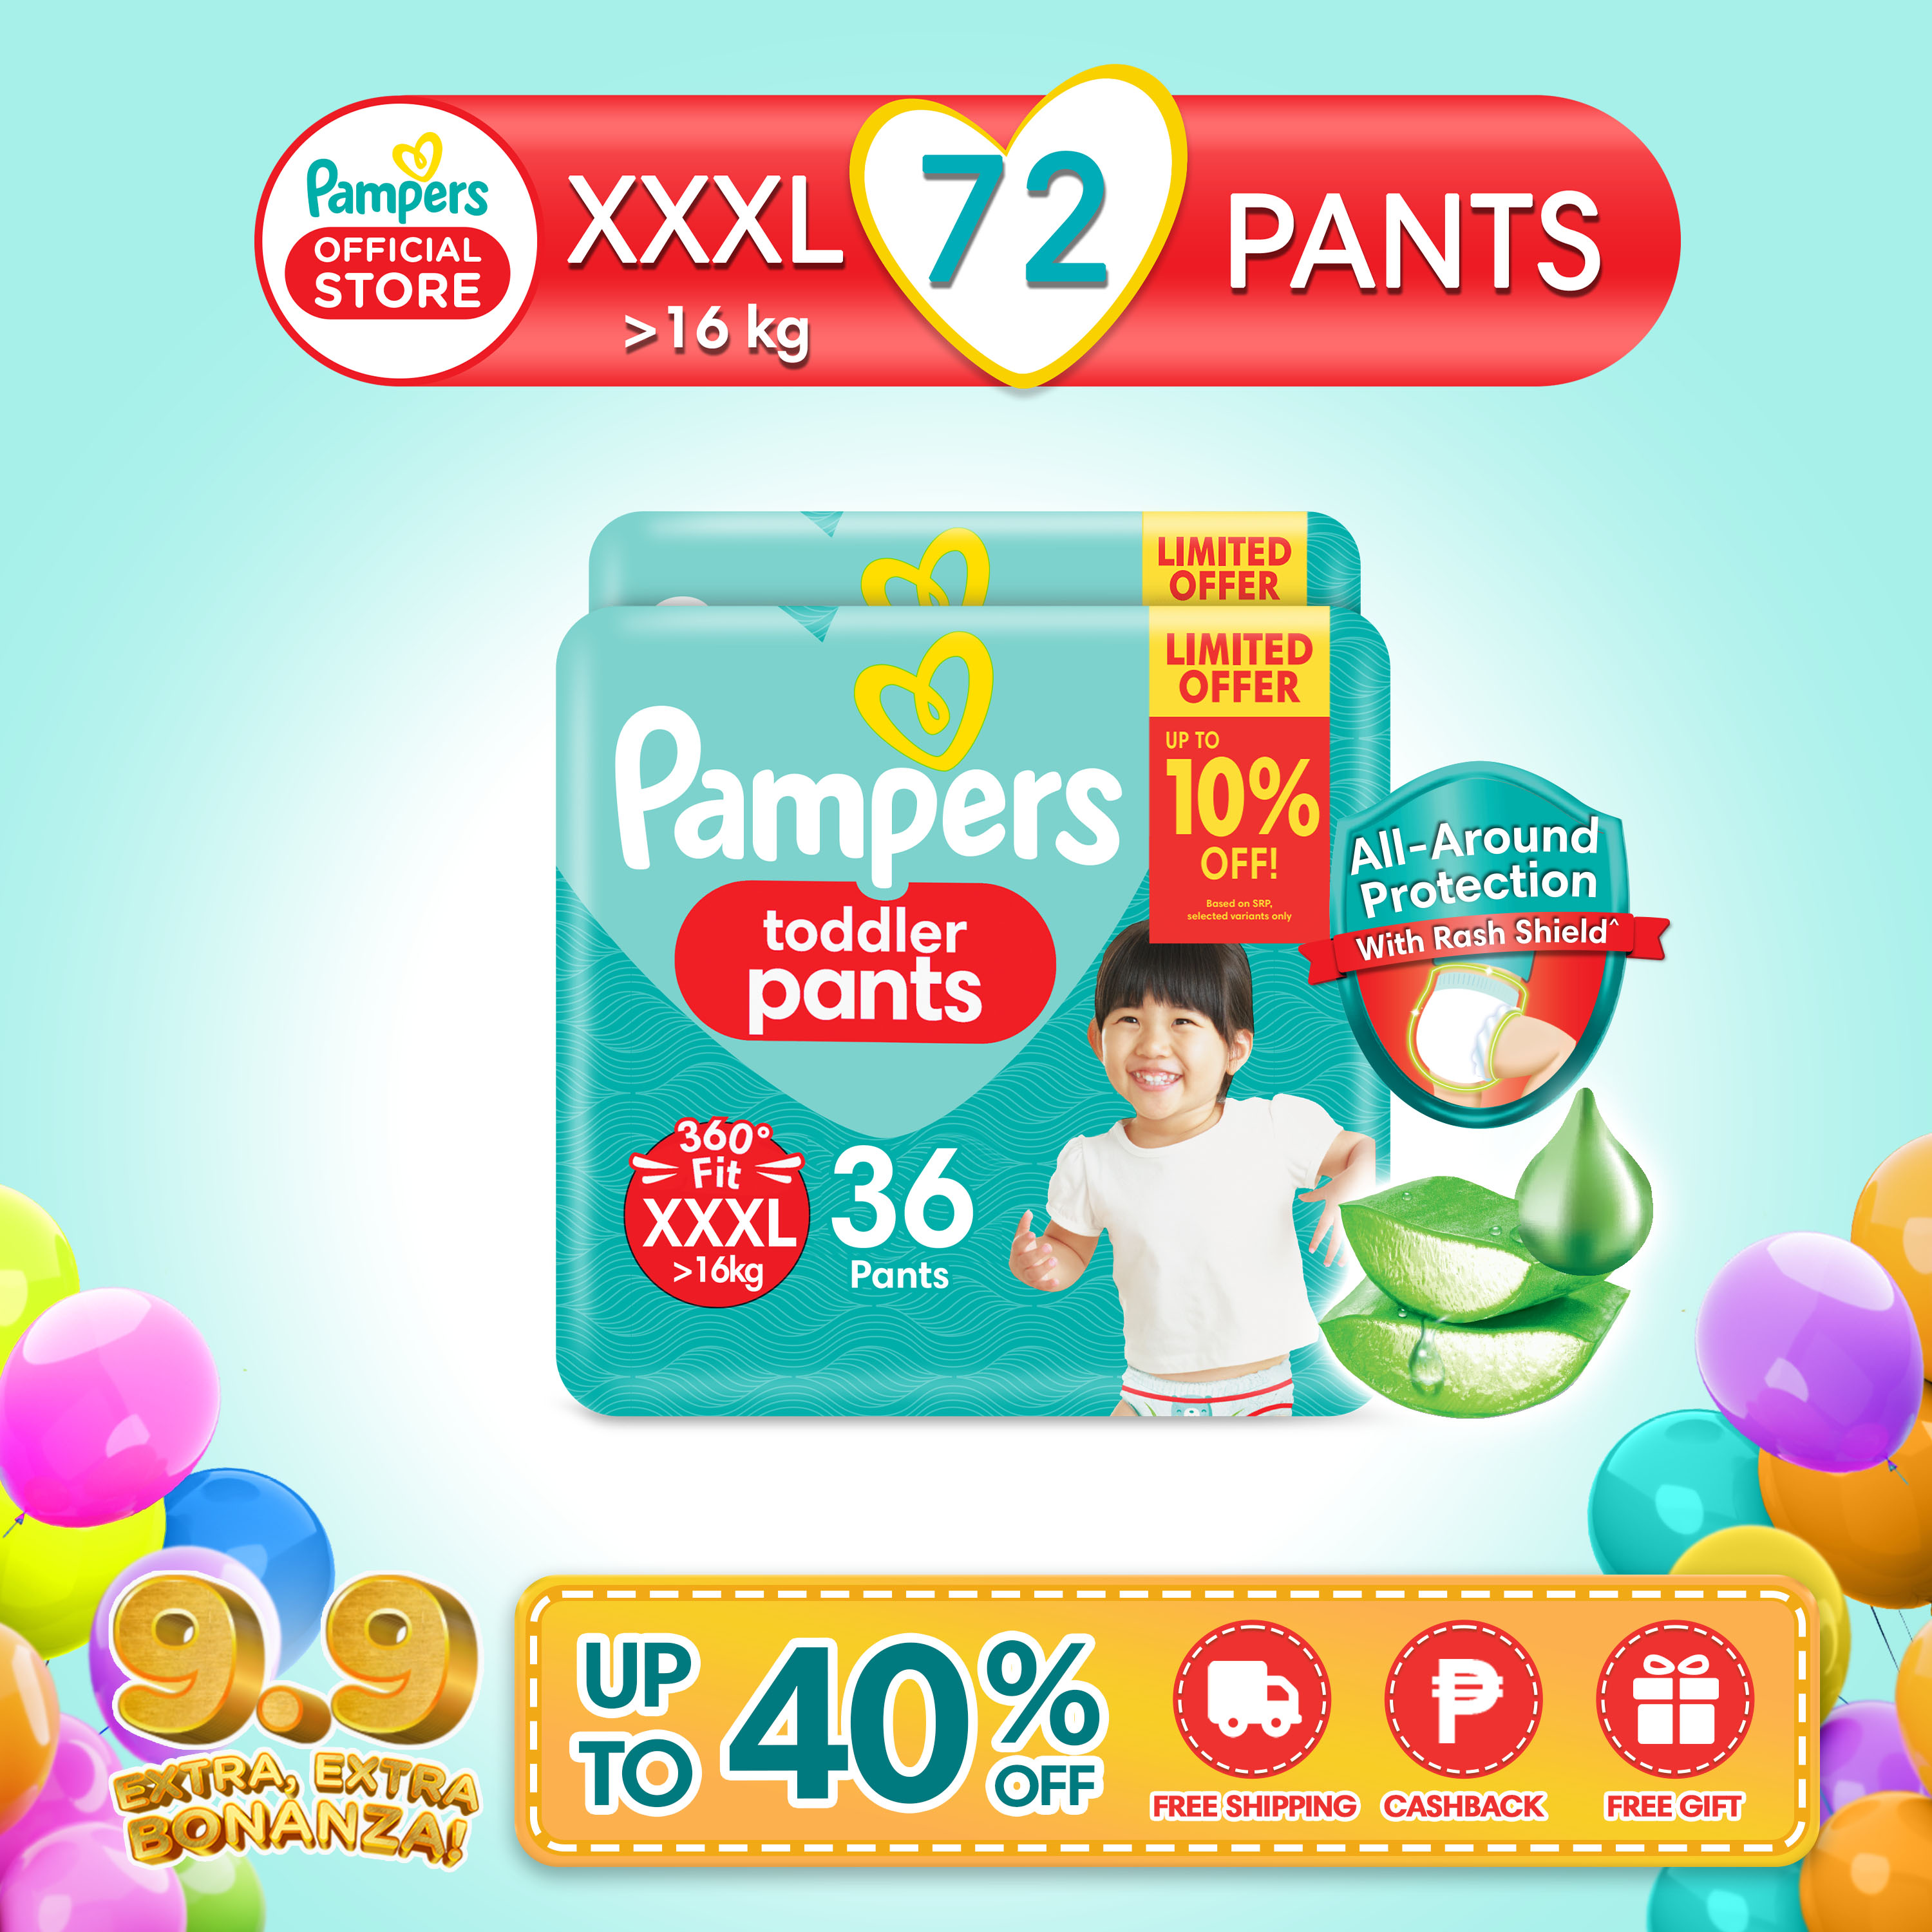 Buy Pampers Premium Care Diaper Pants, XXL 60 pcs + Baby Gentle Wet Wipes  72 pcs (Pack Of 2) Online at Best Price of Rs 2541.78 - bigbasket